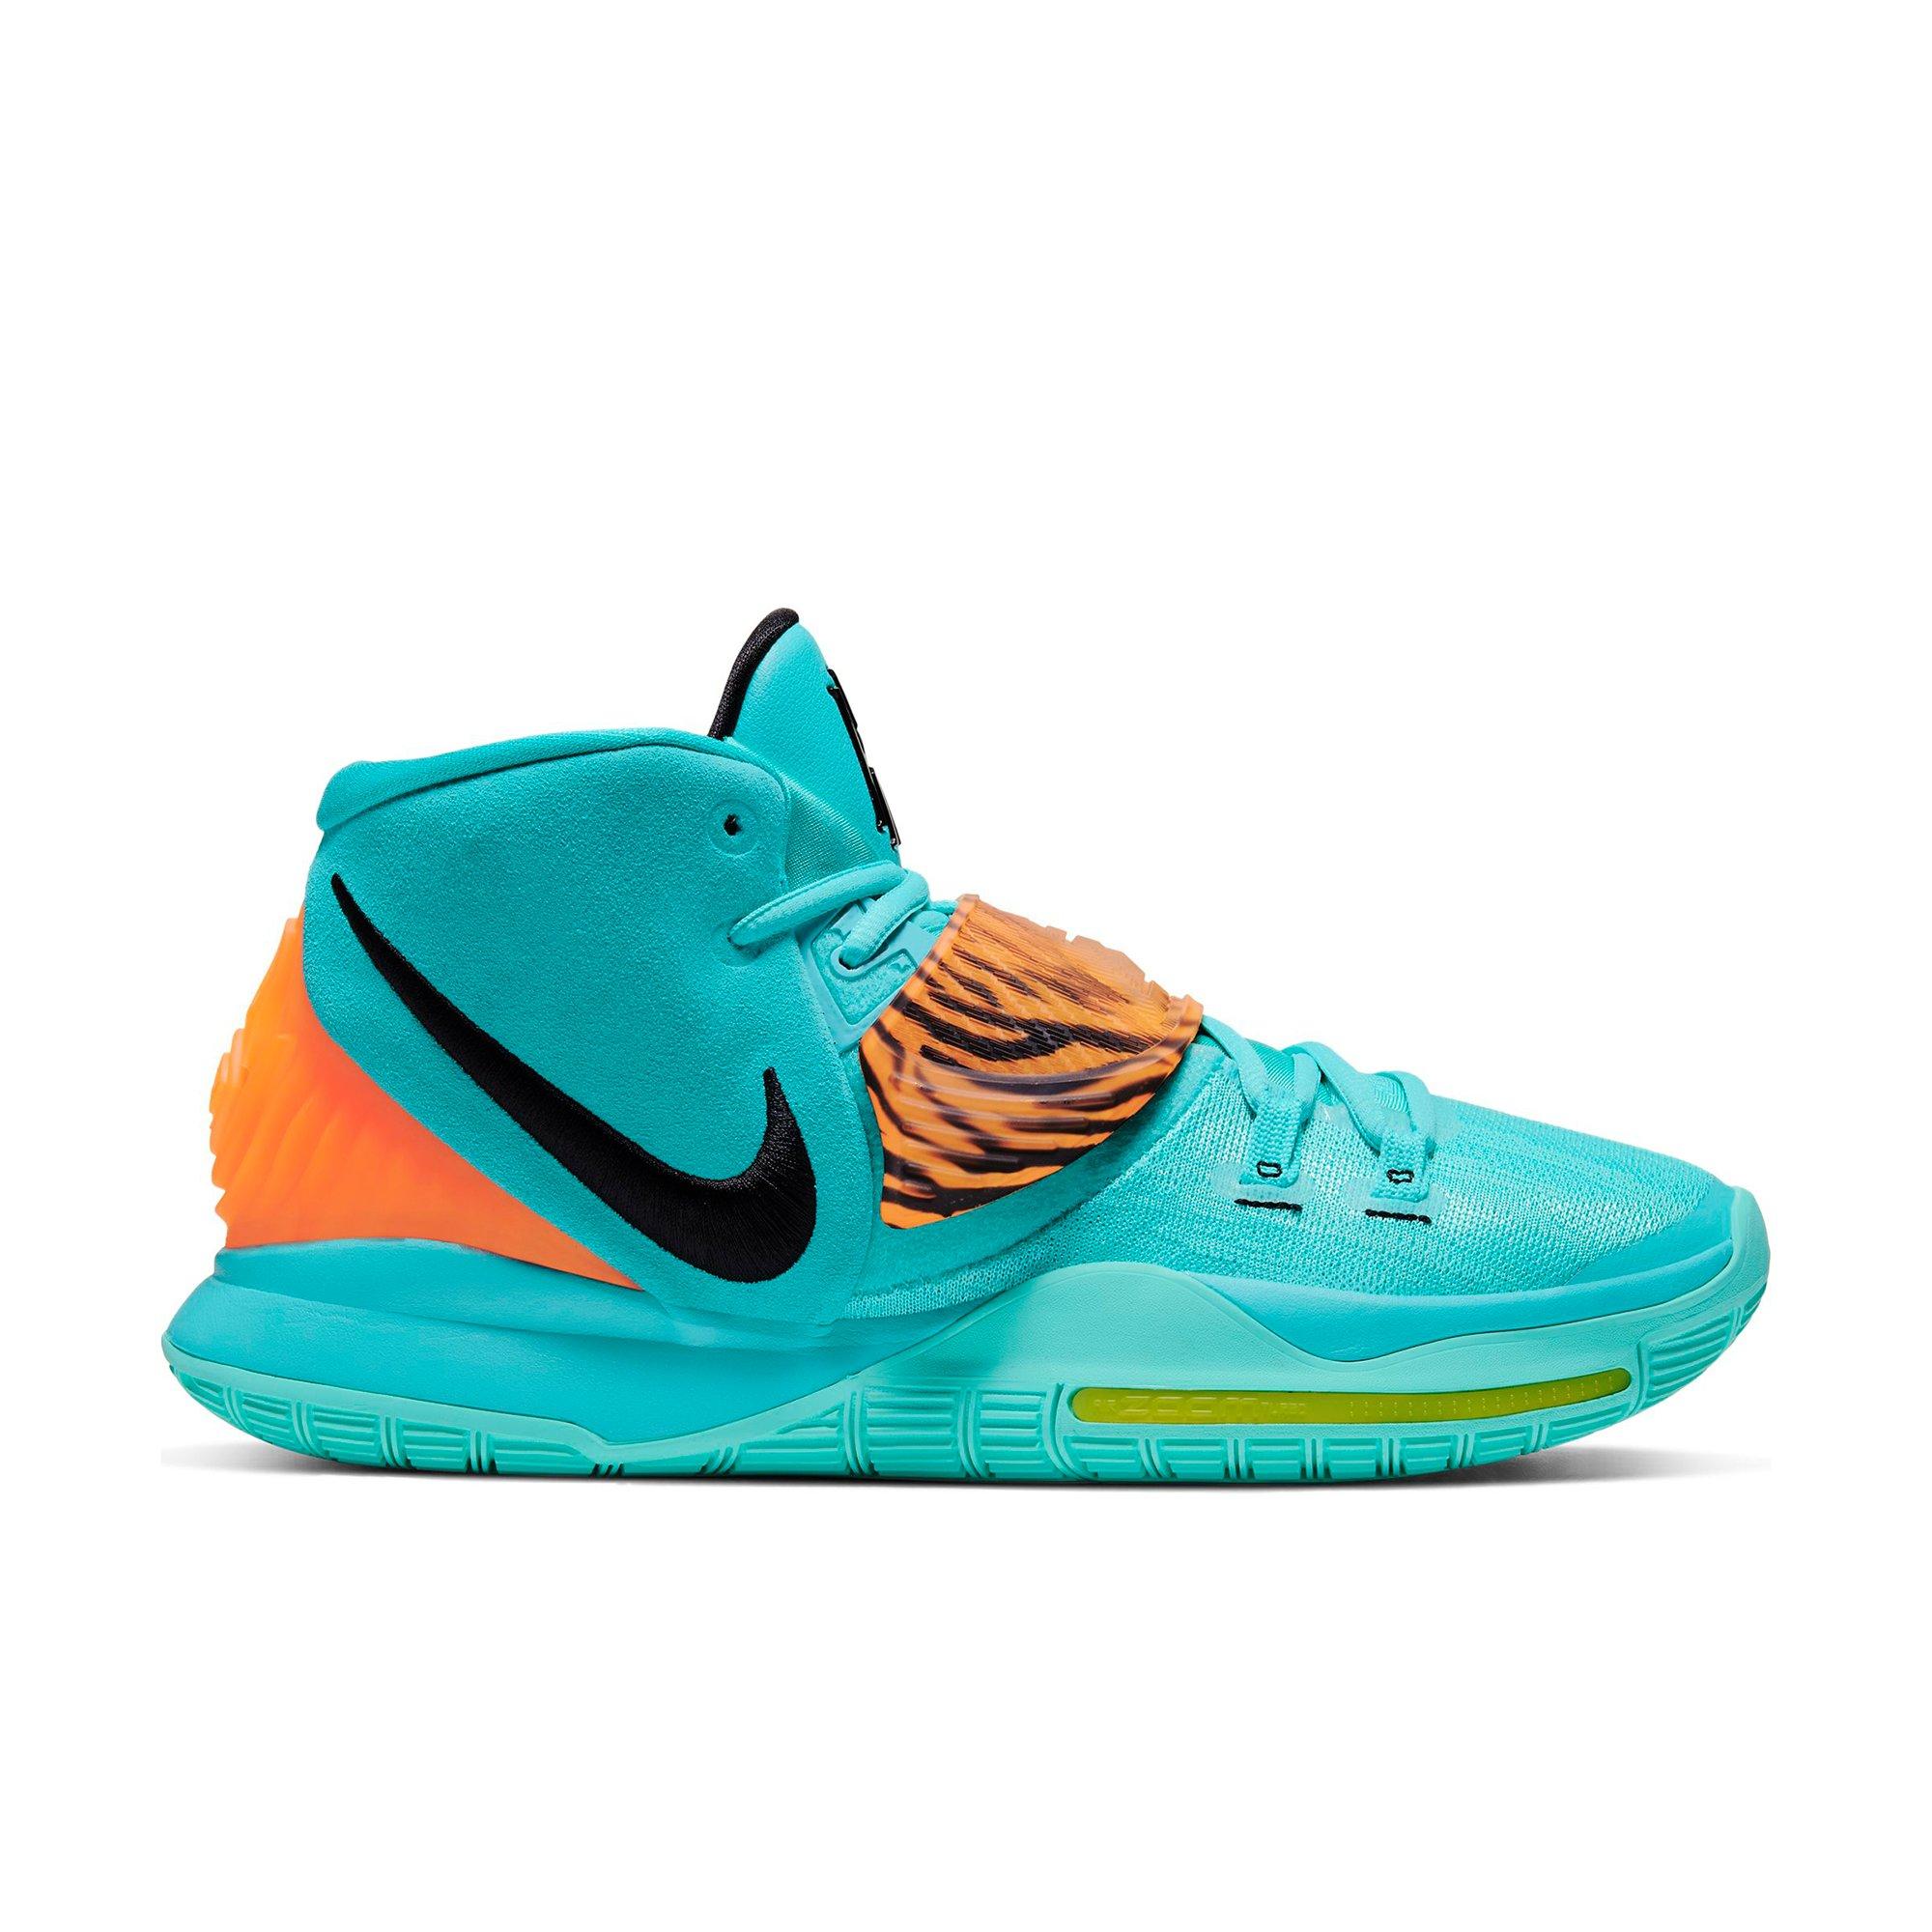 kyrie irving shoes turquoise